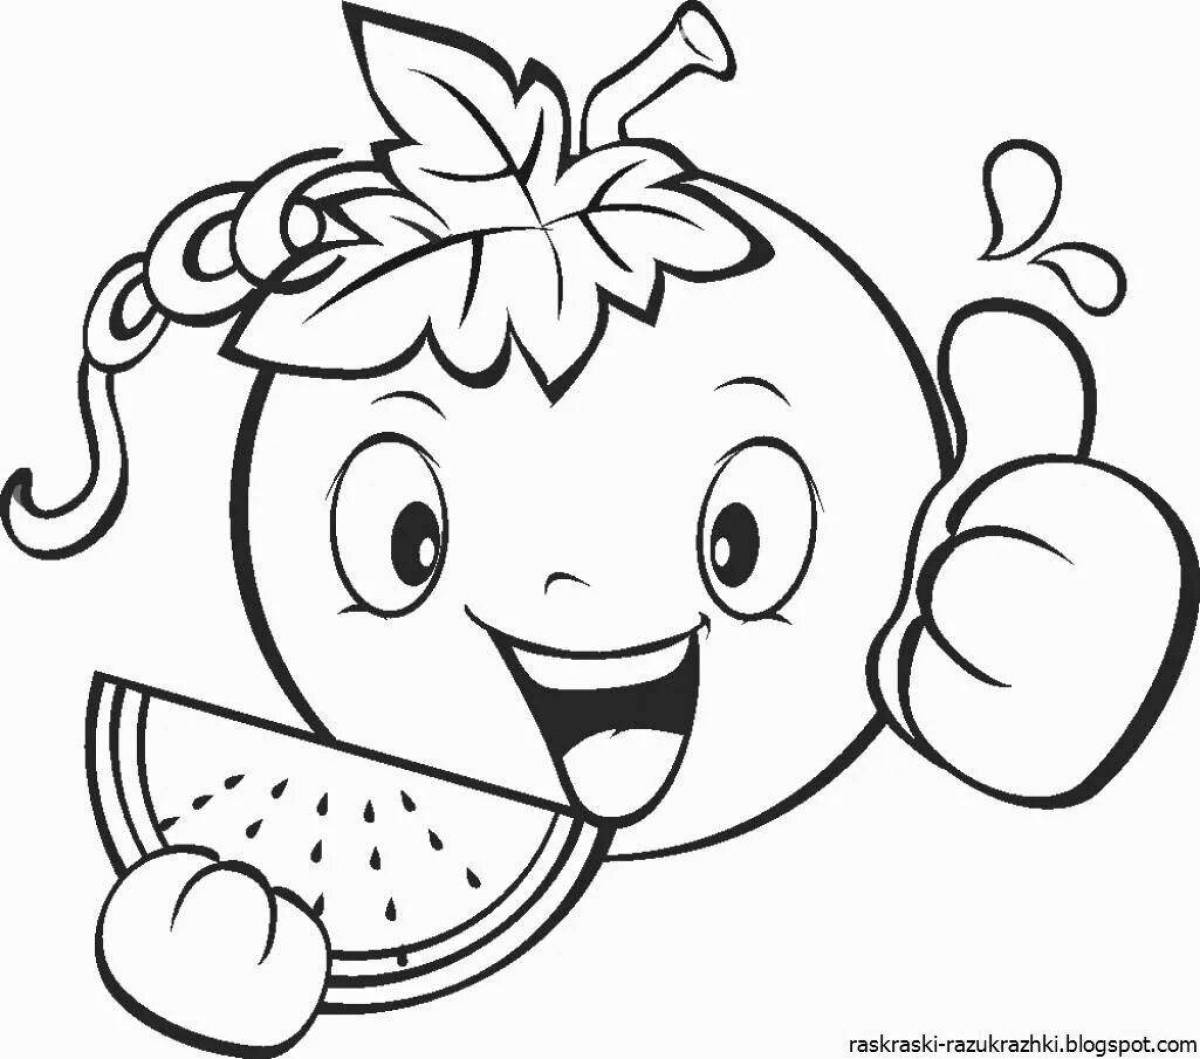 Cute fruit and vegetable coloring book for girls